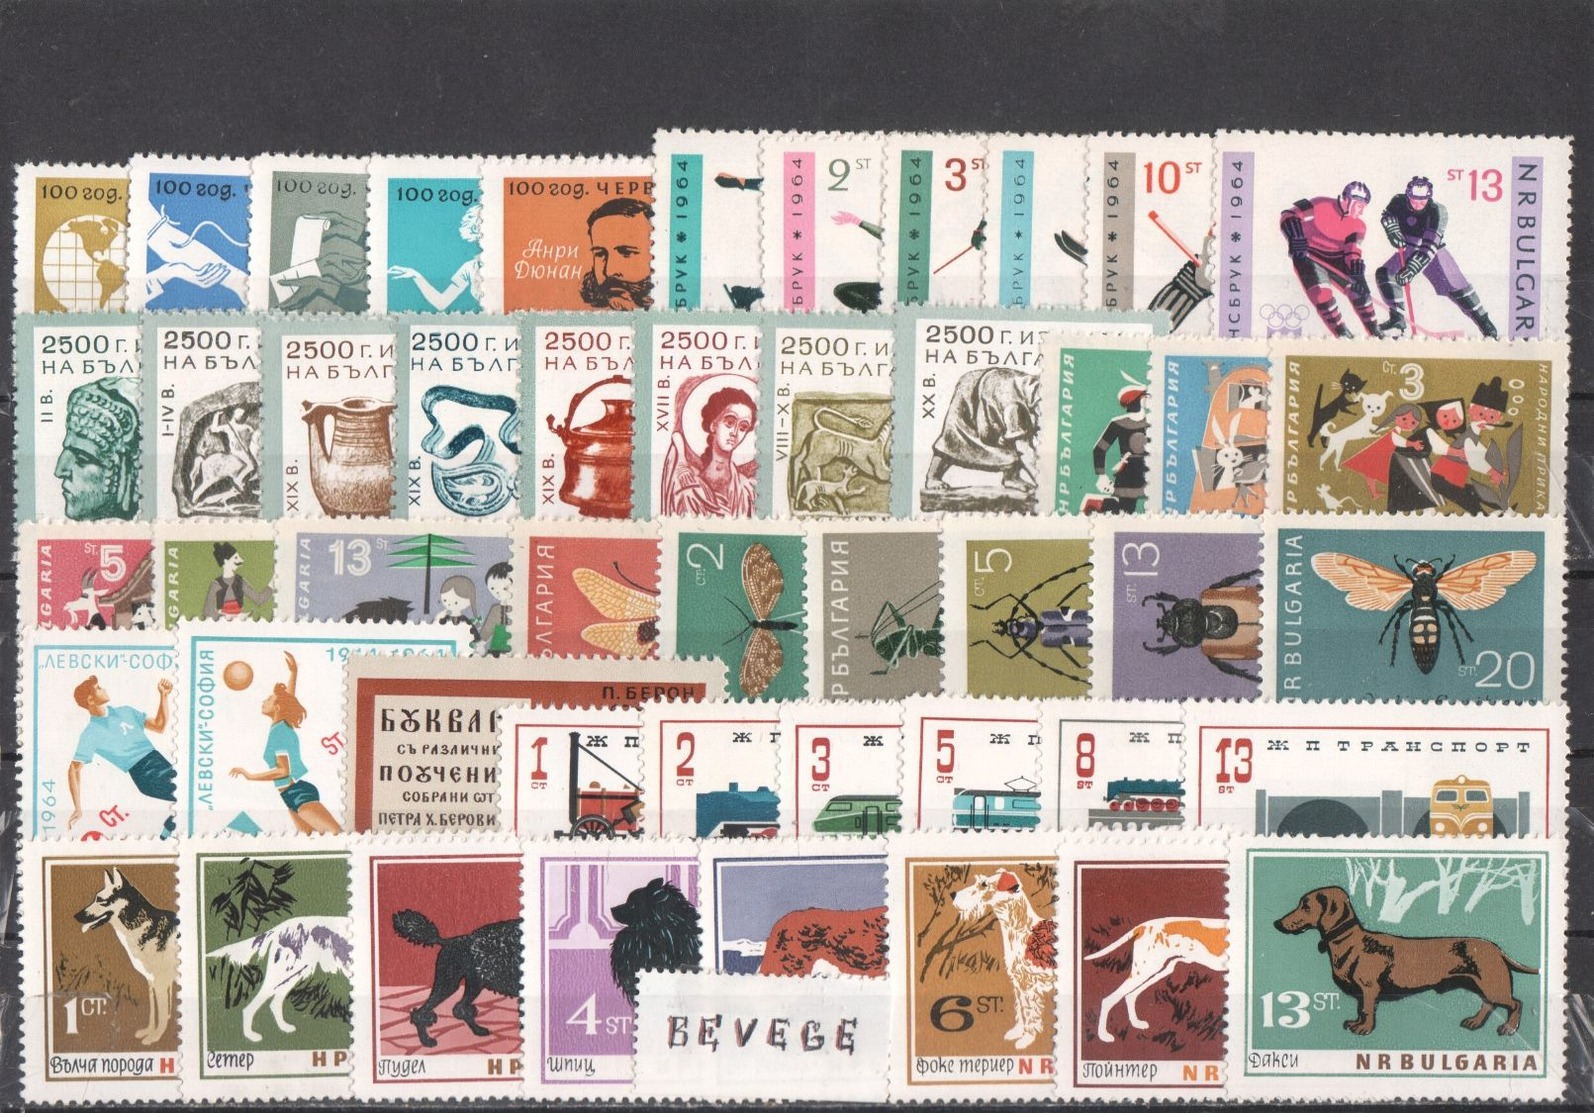 44-519 A / BULGARIA  - 1964 FULL YEAR ** Unused - FREE SHIPPING !!! - Années Complètes